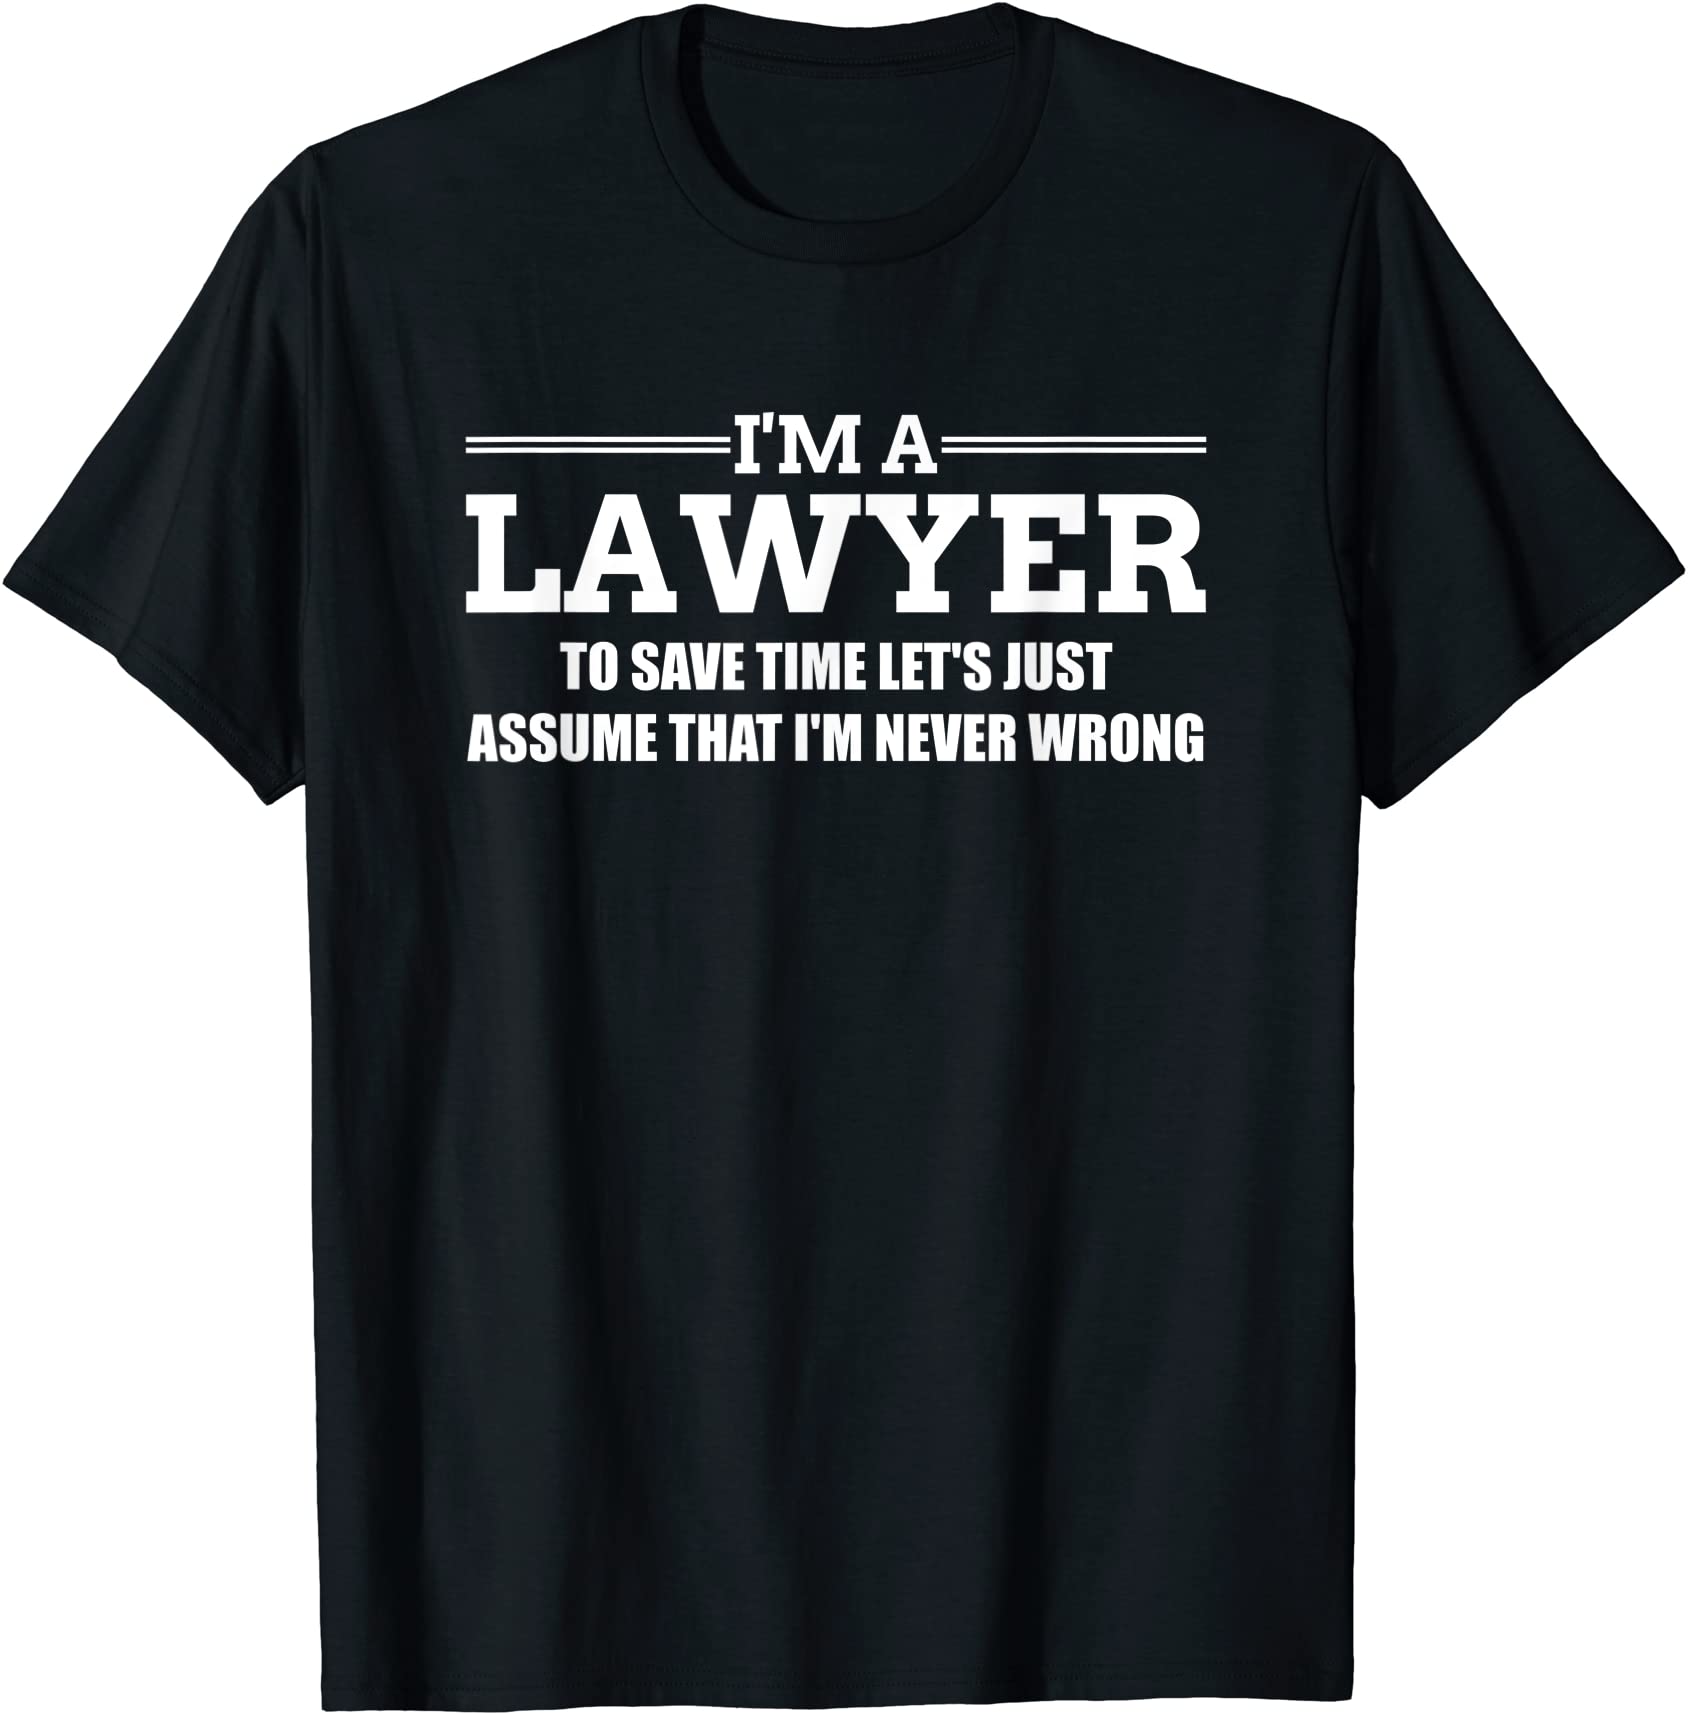 i39m a lawyer attorney legal shirt and gift t shirt men - Buy t-shirt ...